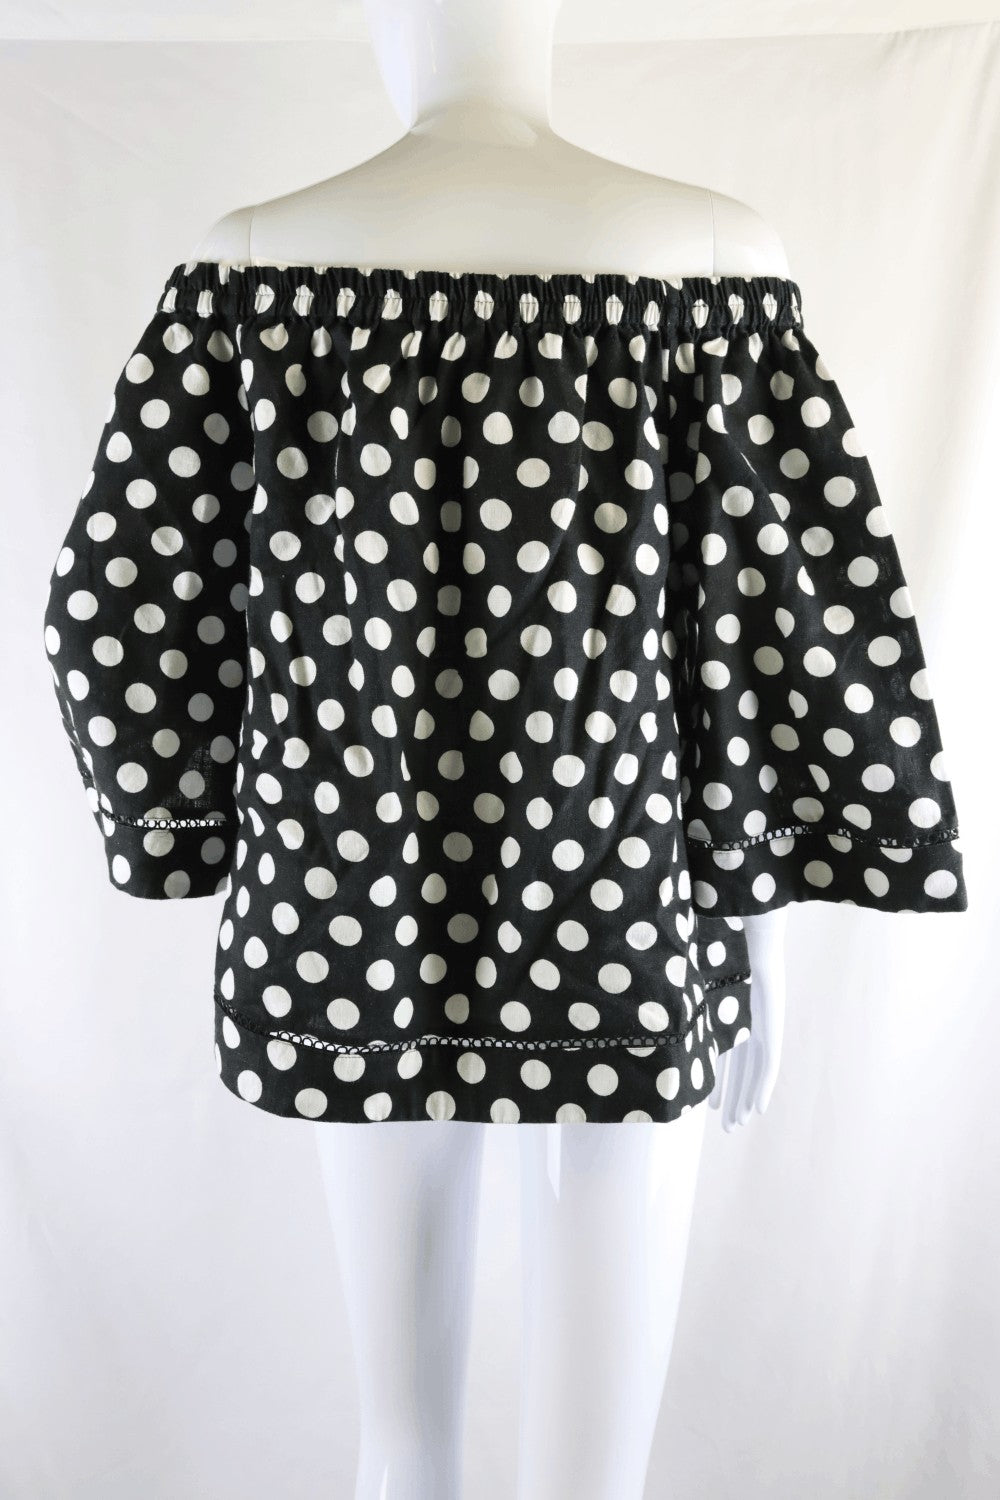 Country Road Black And White Polka Dot Top 12